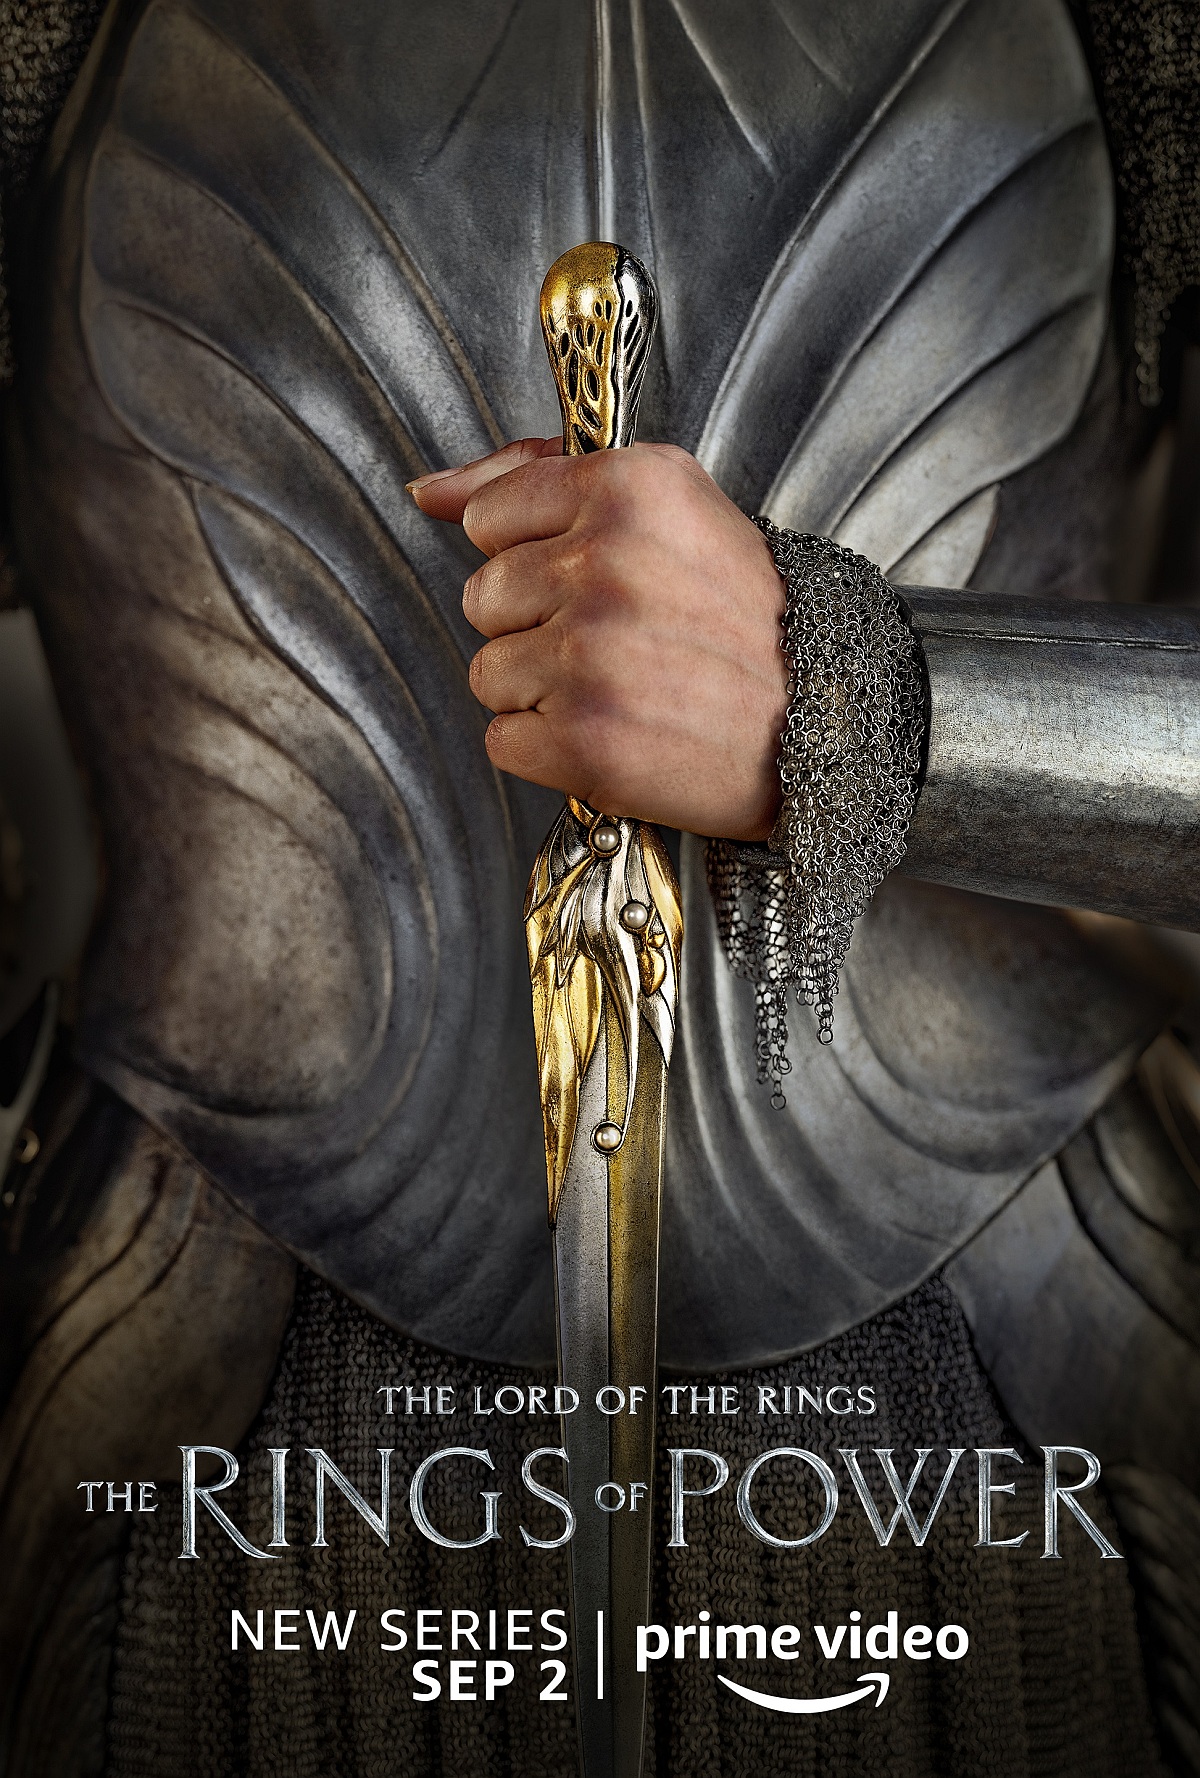  The Lord of the Rings: The Rings of Power